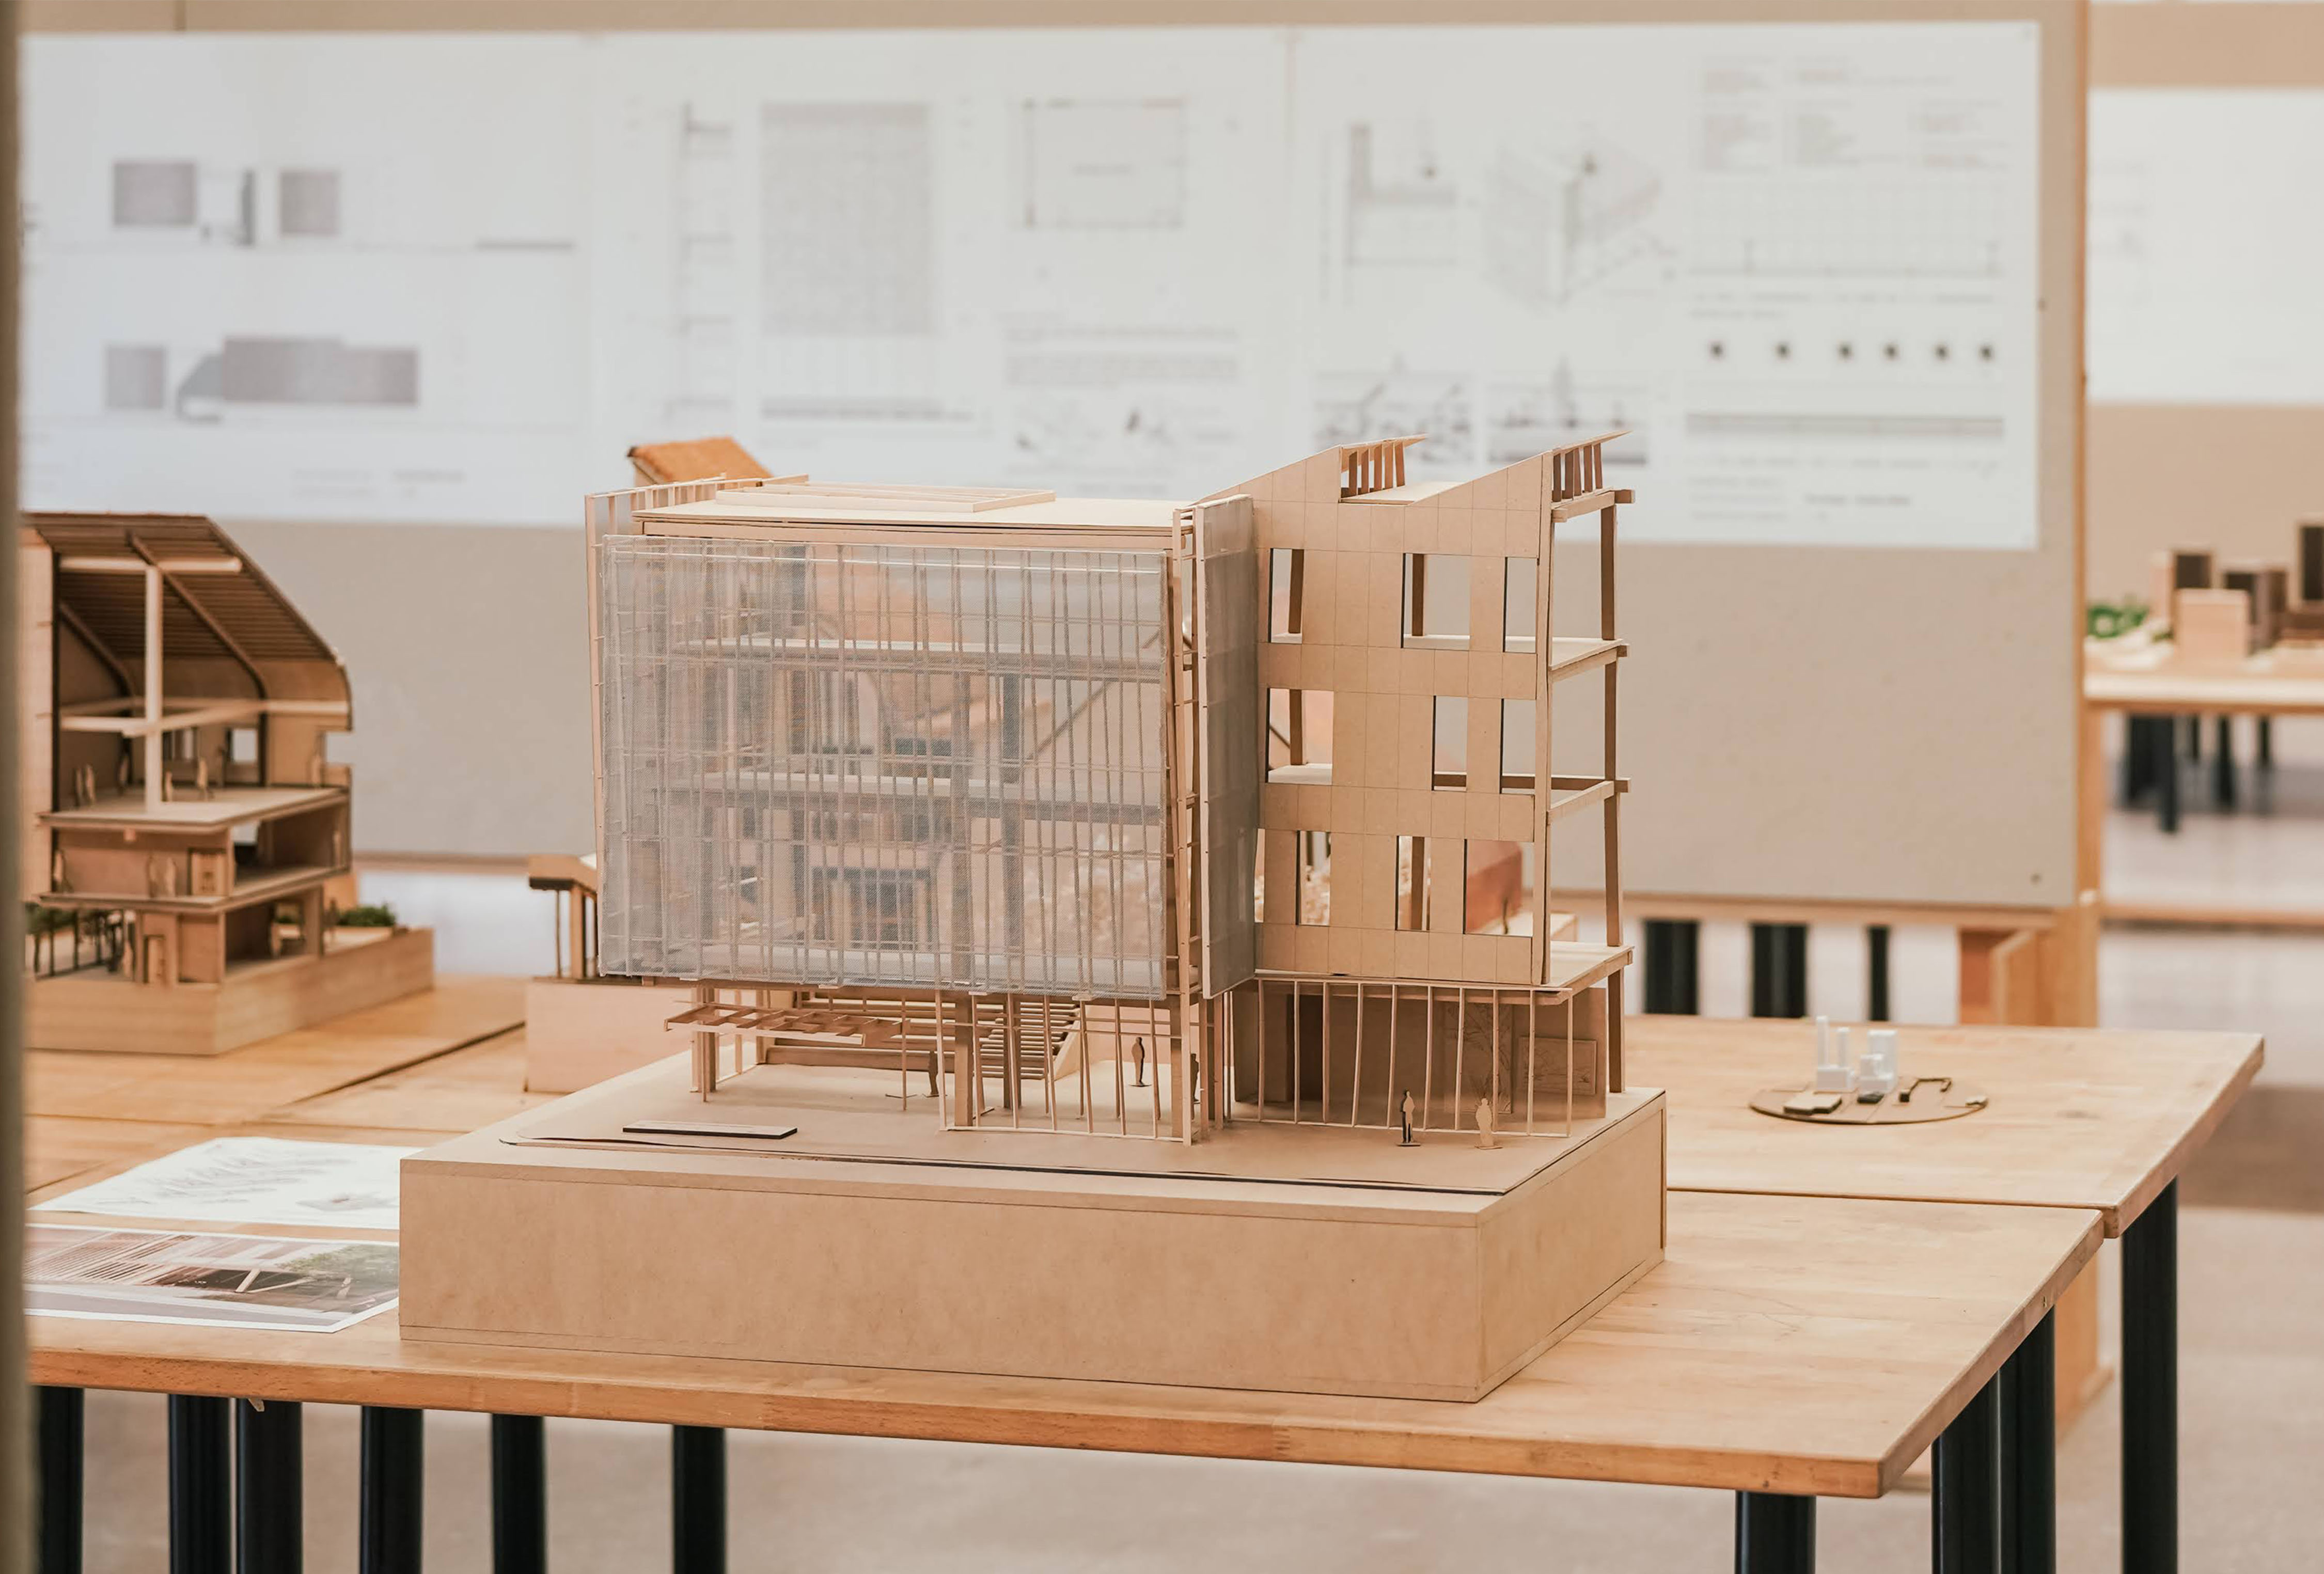 Model of the Bloor Dufferin Collegiate by Katy Cao and Charissa Medrano 